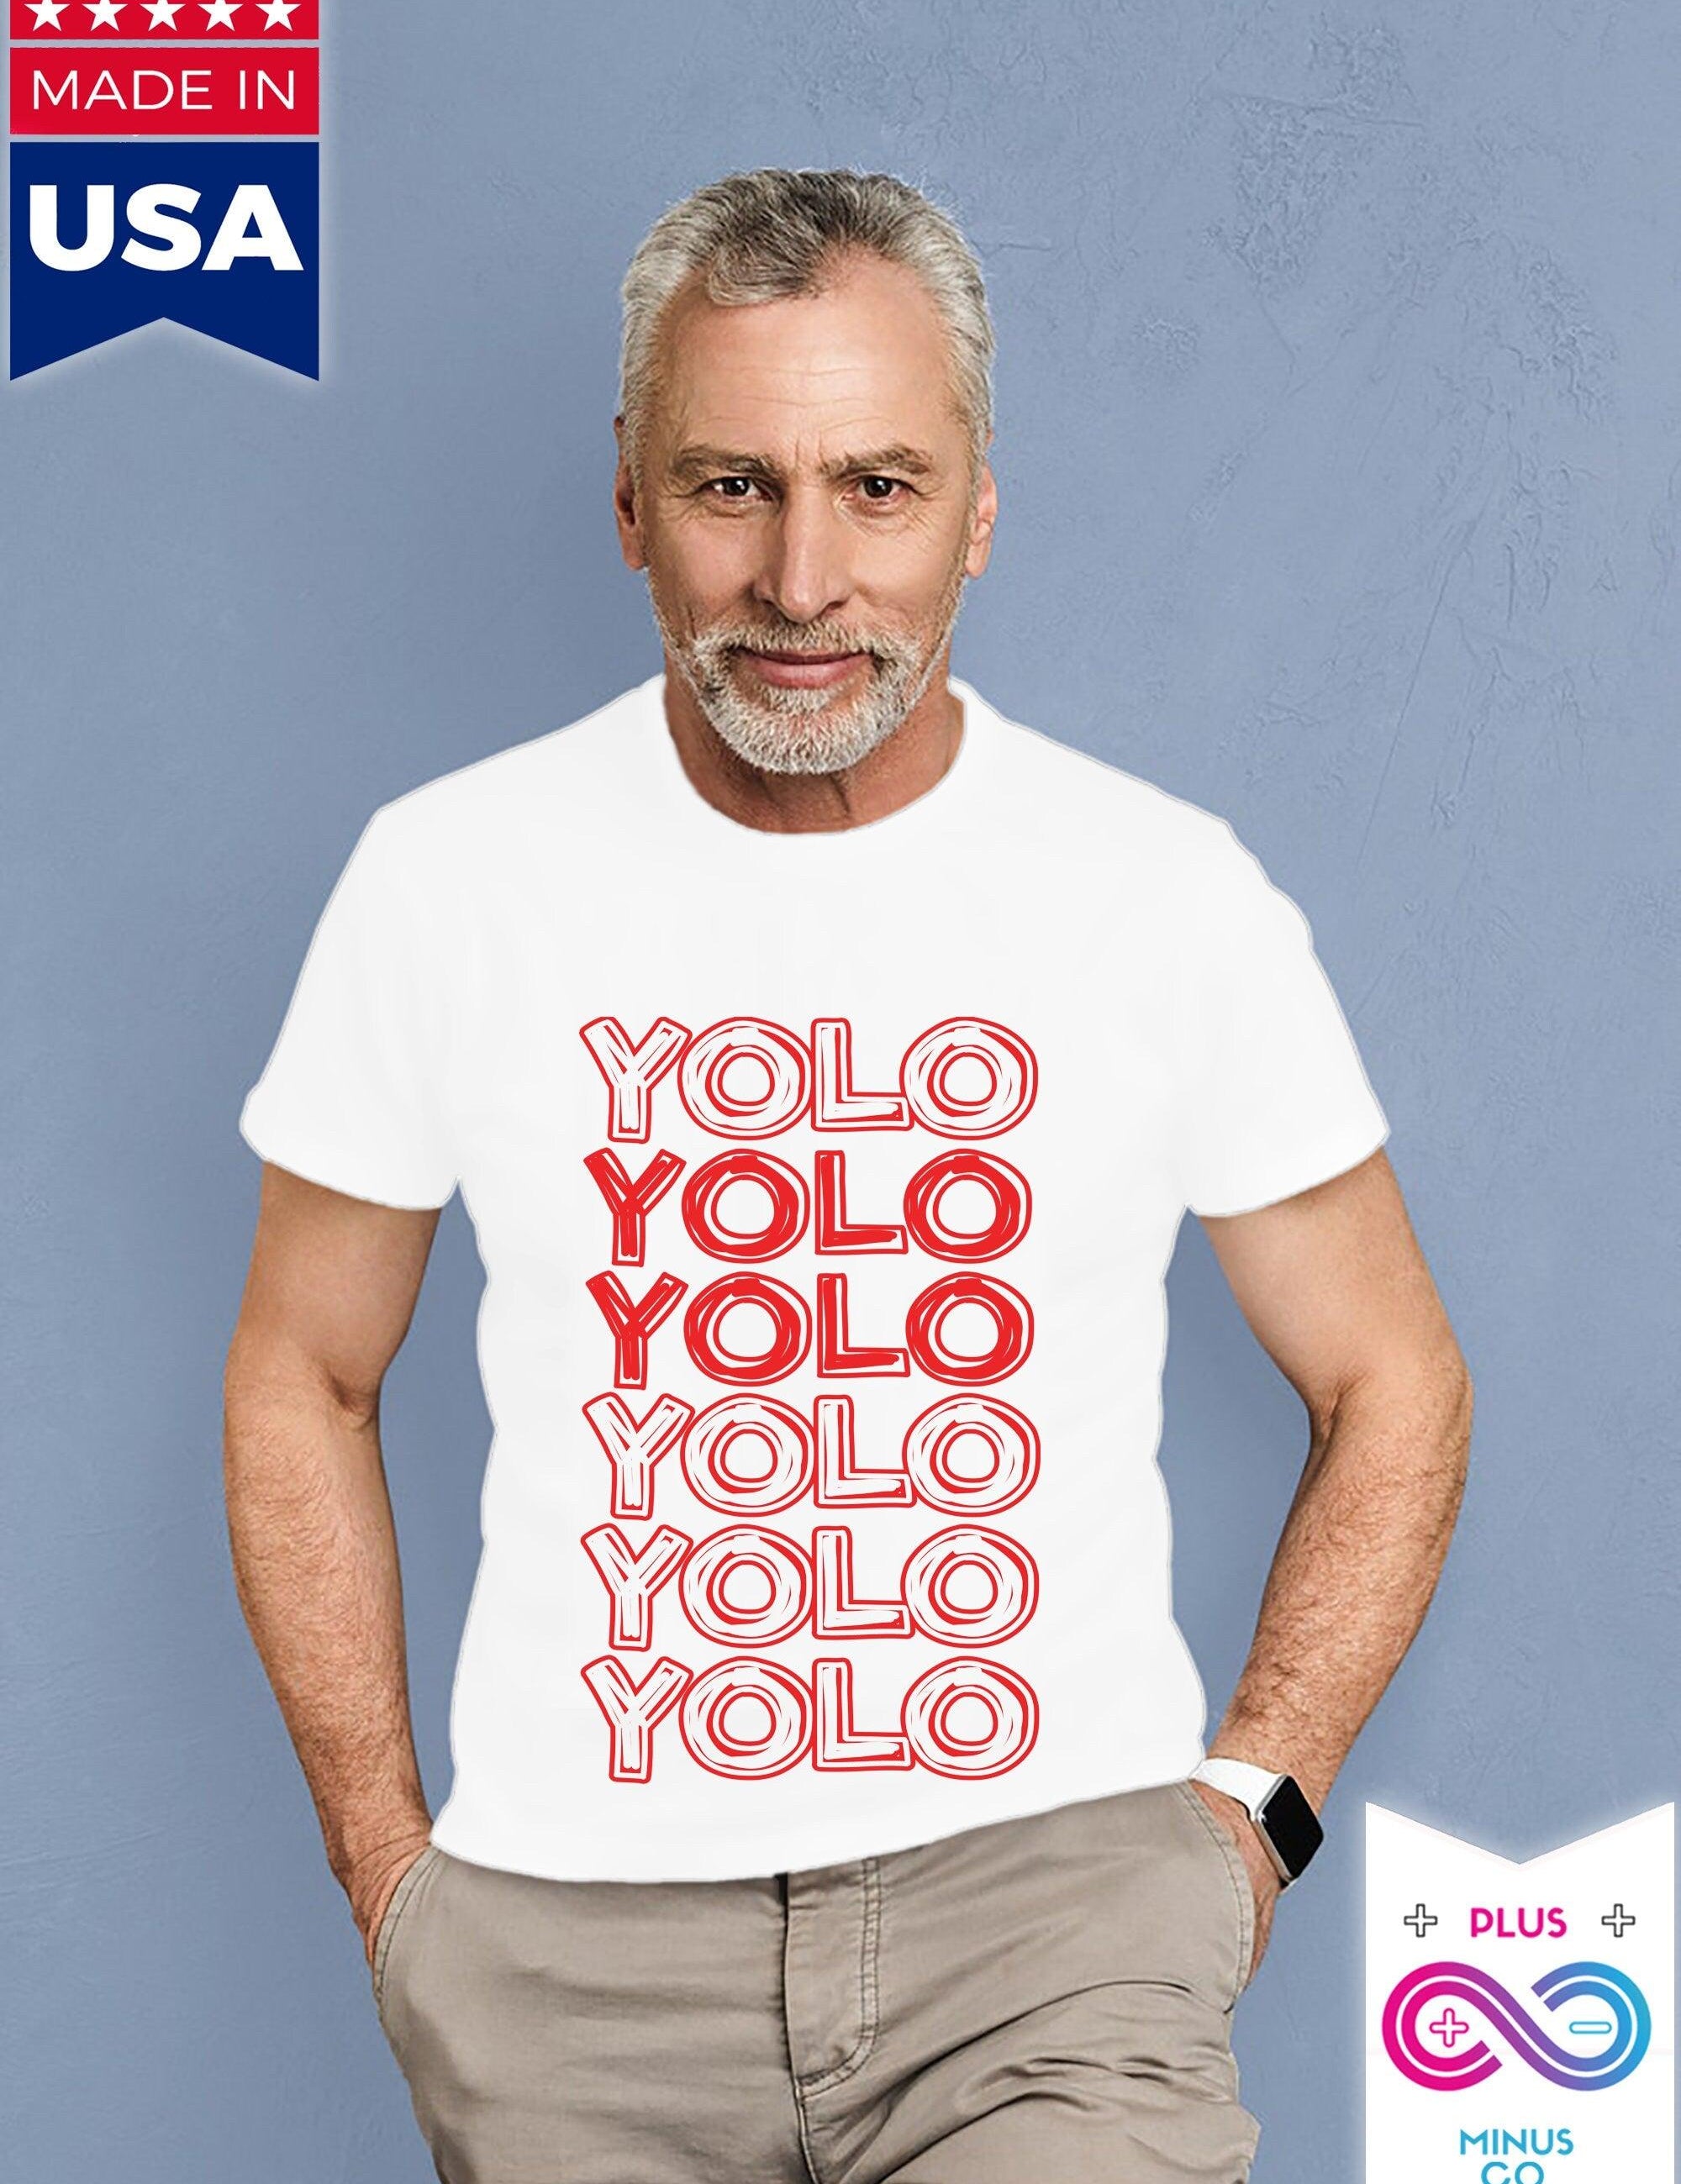 YOLO レッド デザイン クラシック T シャツ YOLO You Only Live Once 面白いシャツ - plusminusco.com